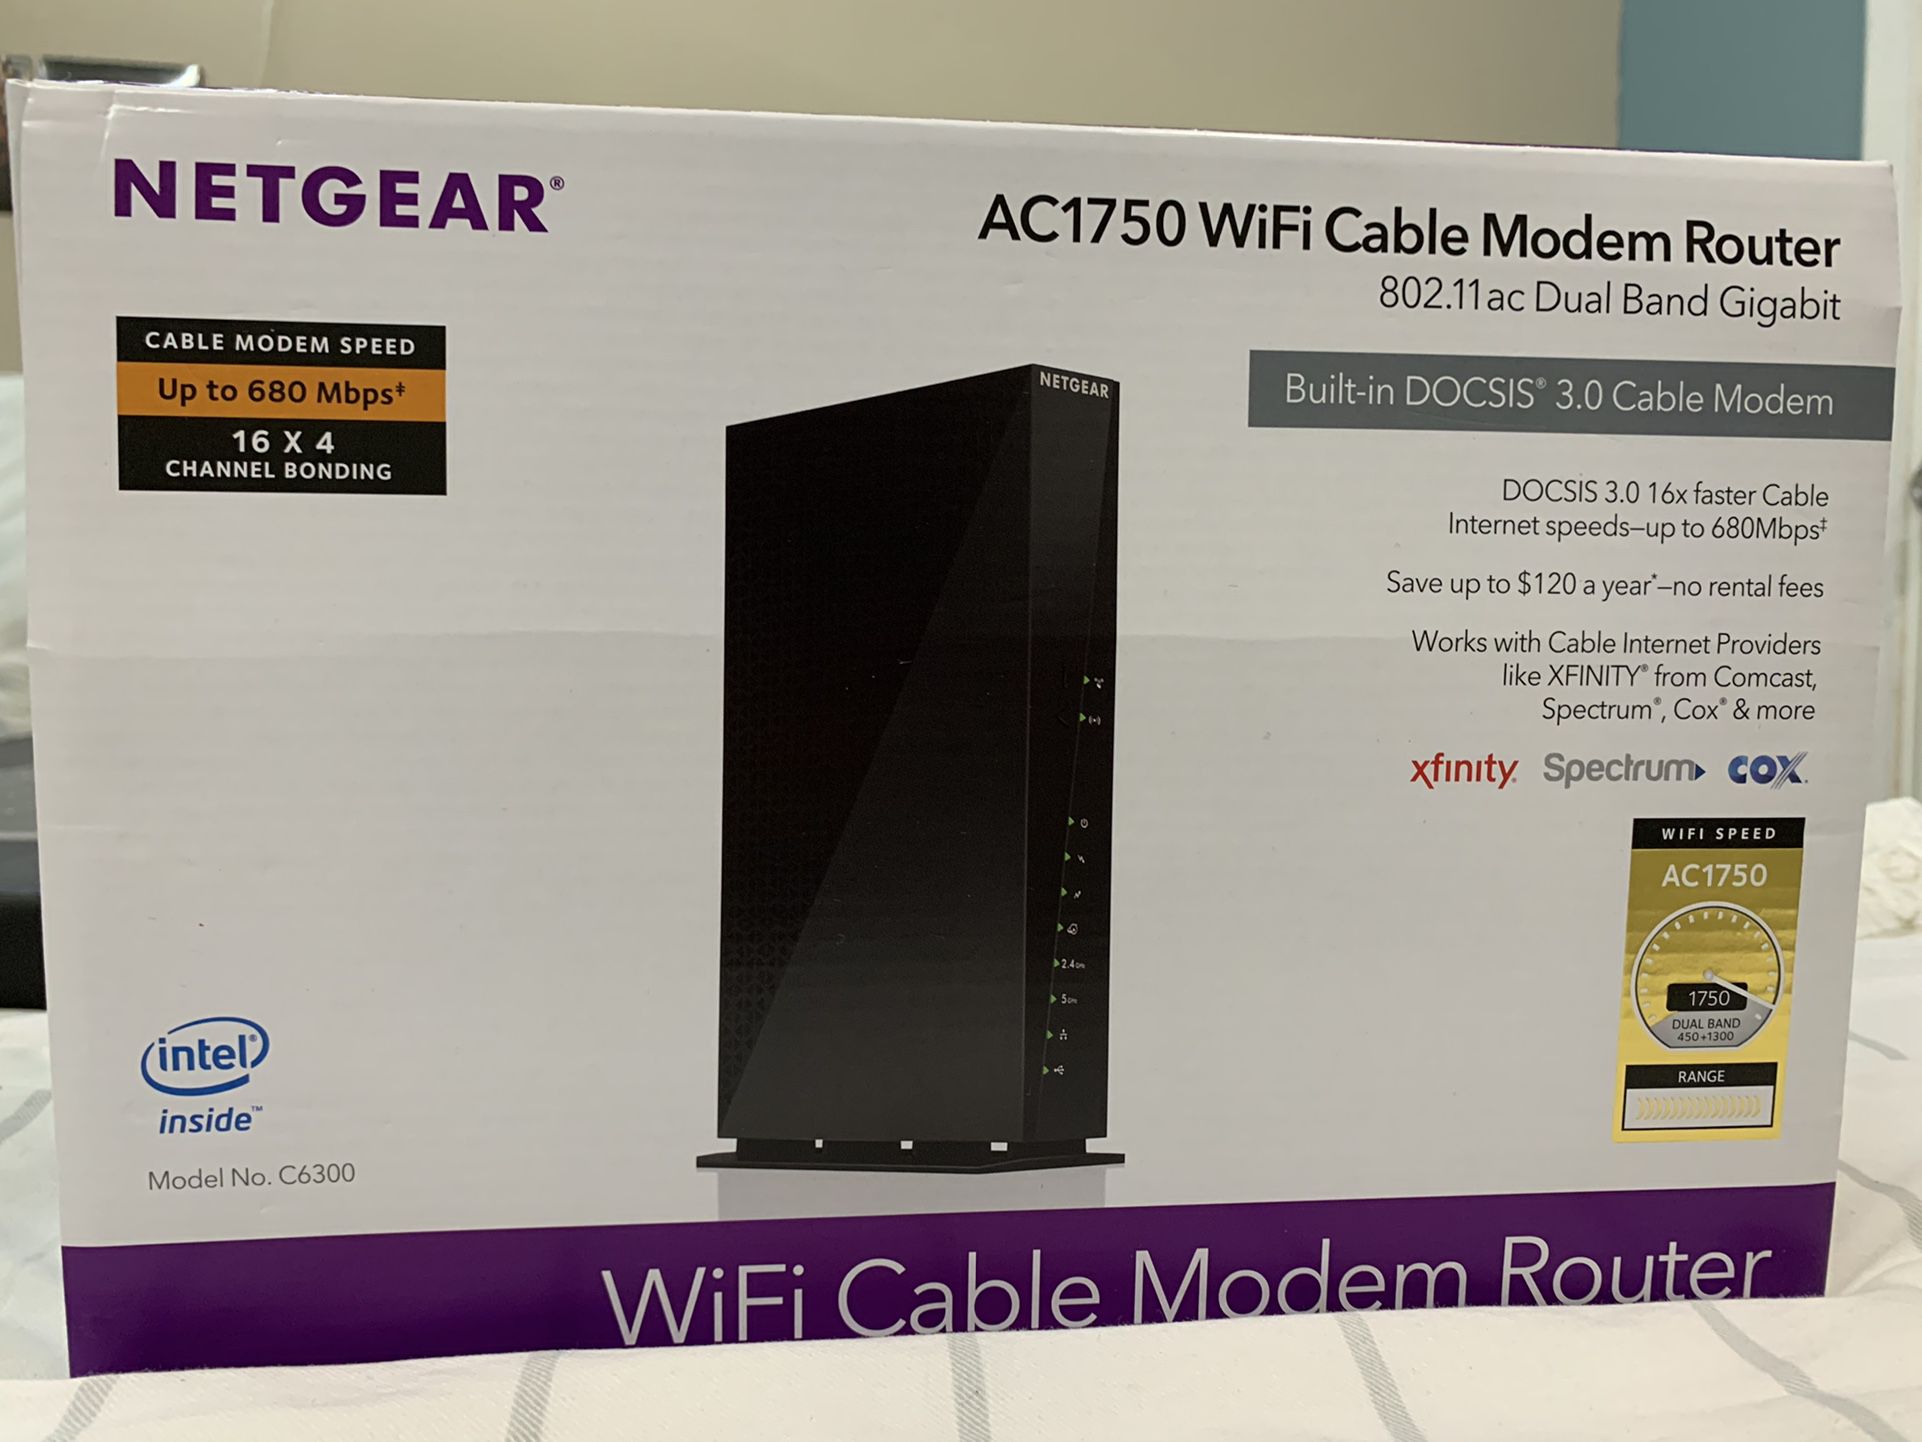 NETGEAR AC1750 Dual Band  WiFi Cable Modem Router